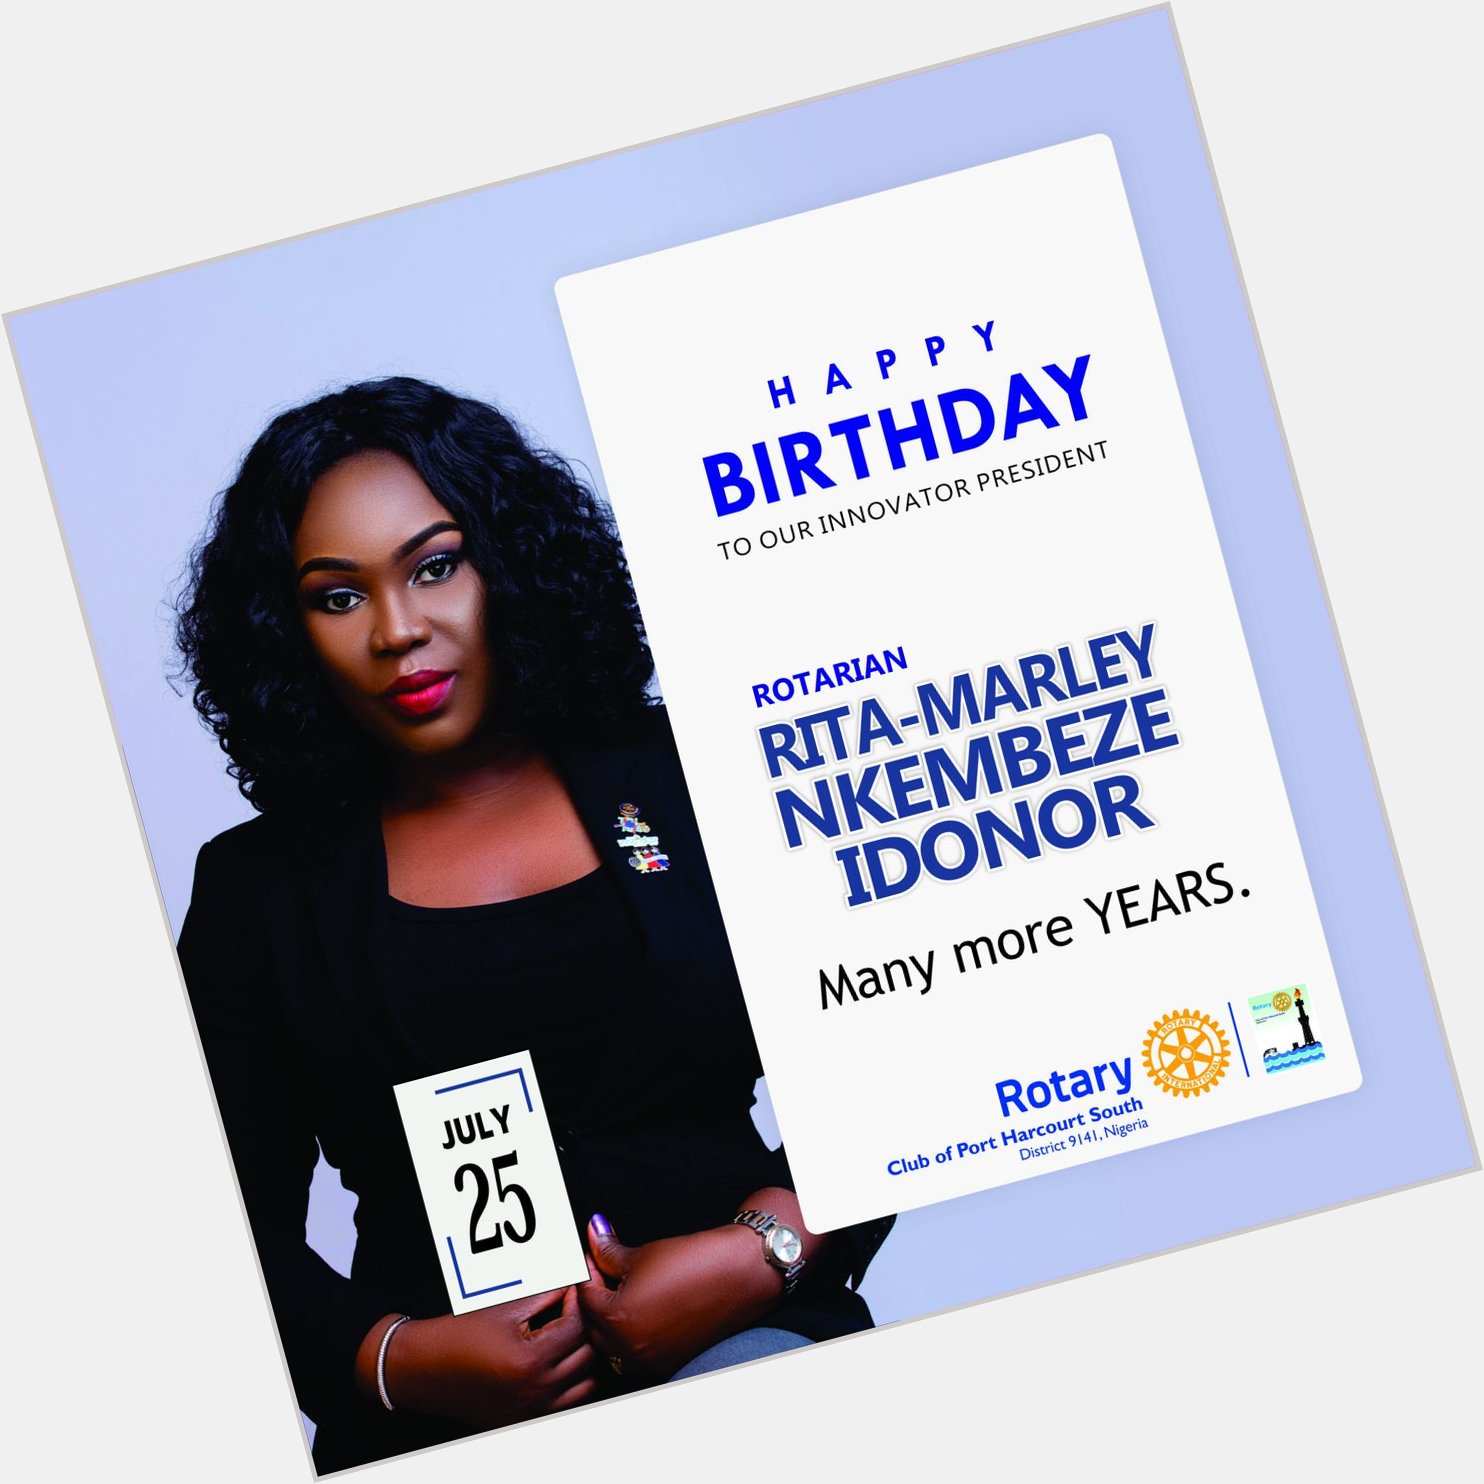 We join our voice to wish our Innovative President Rtn. Rita-Marley Nkembeze Idonor a happy birthday.

Best wishes. 